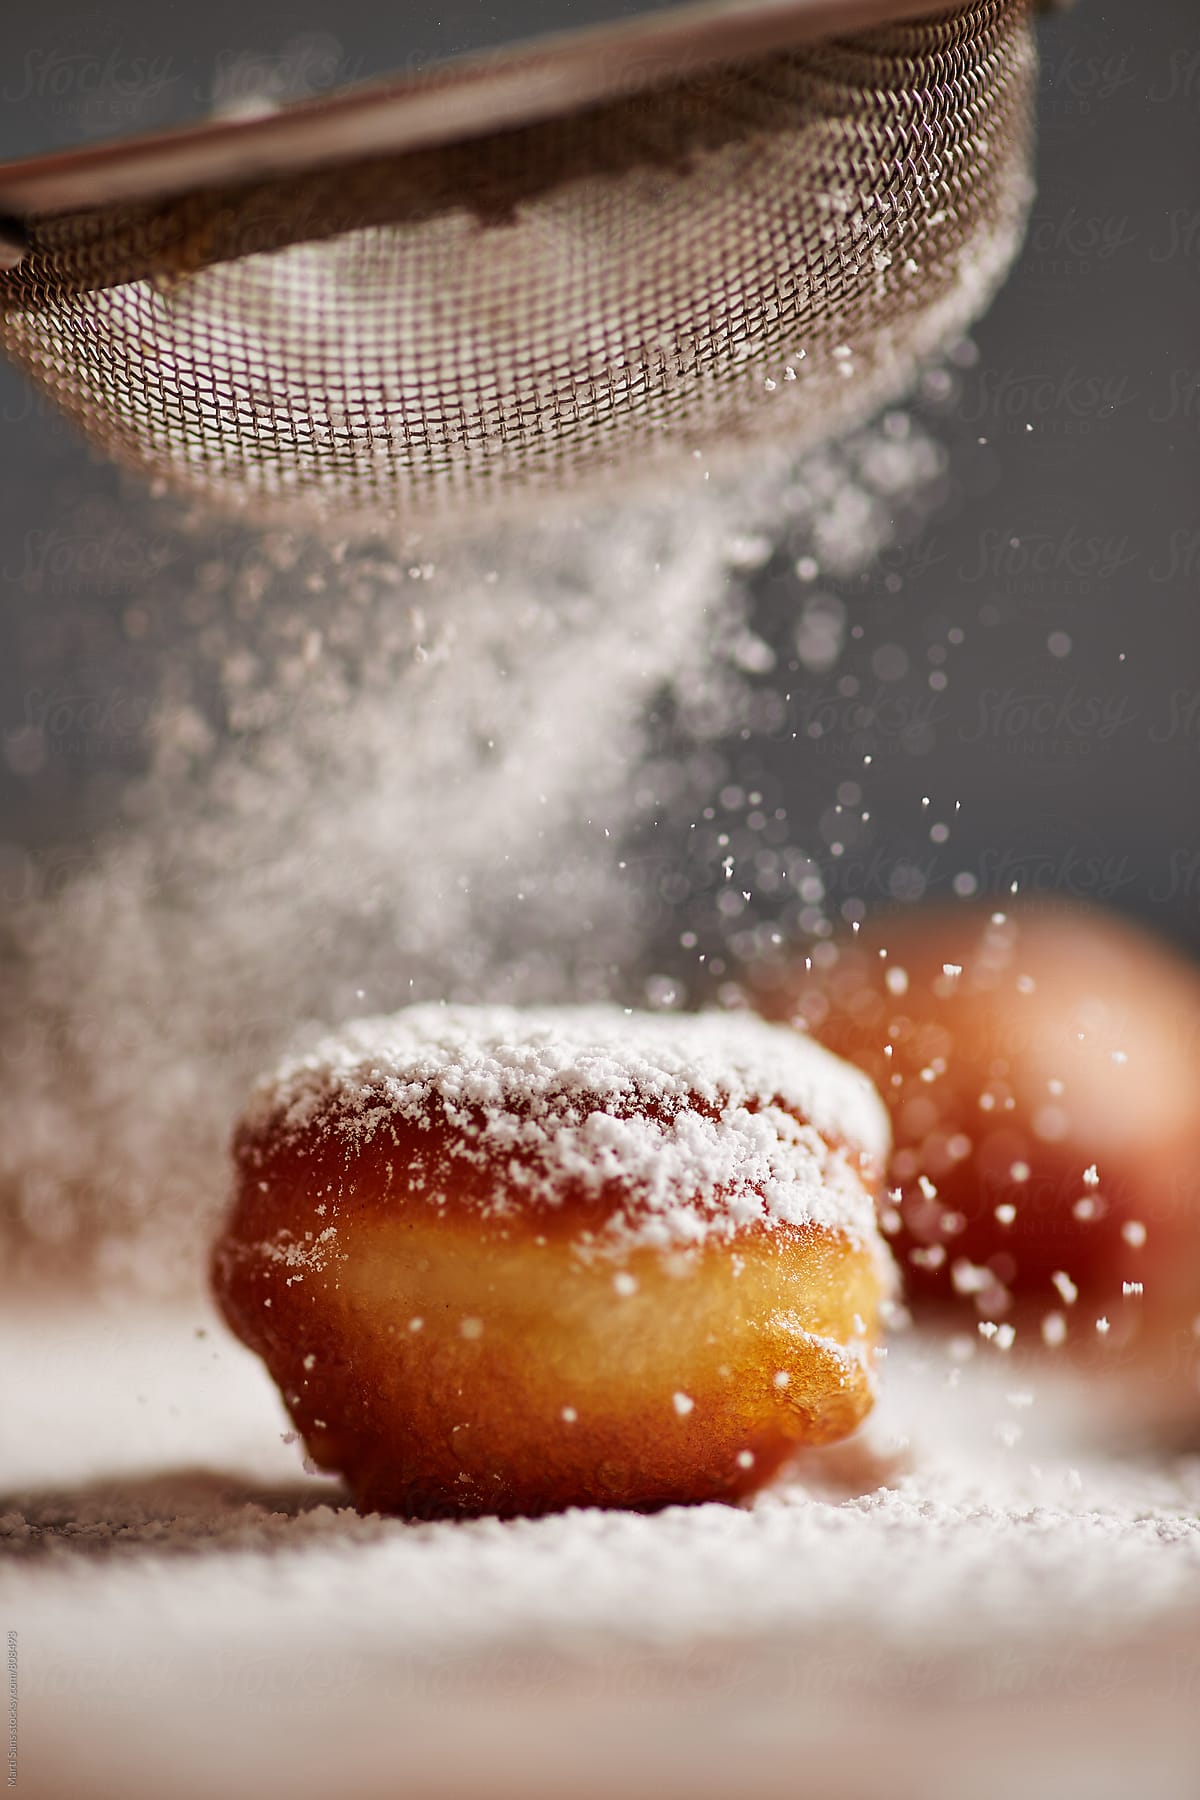 Dusting icing sugar on donut holes